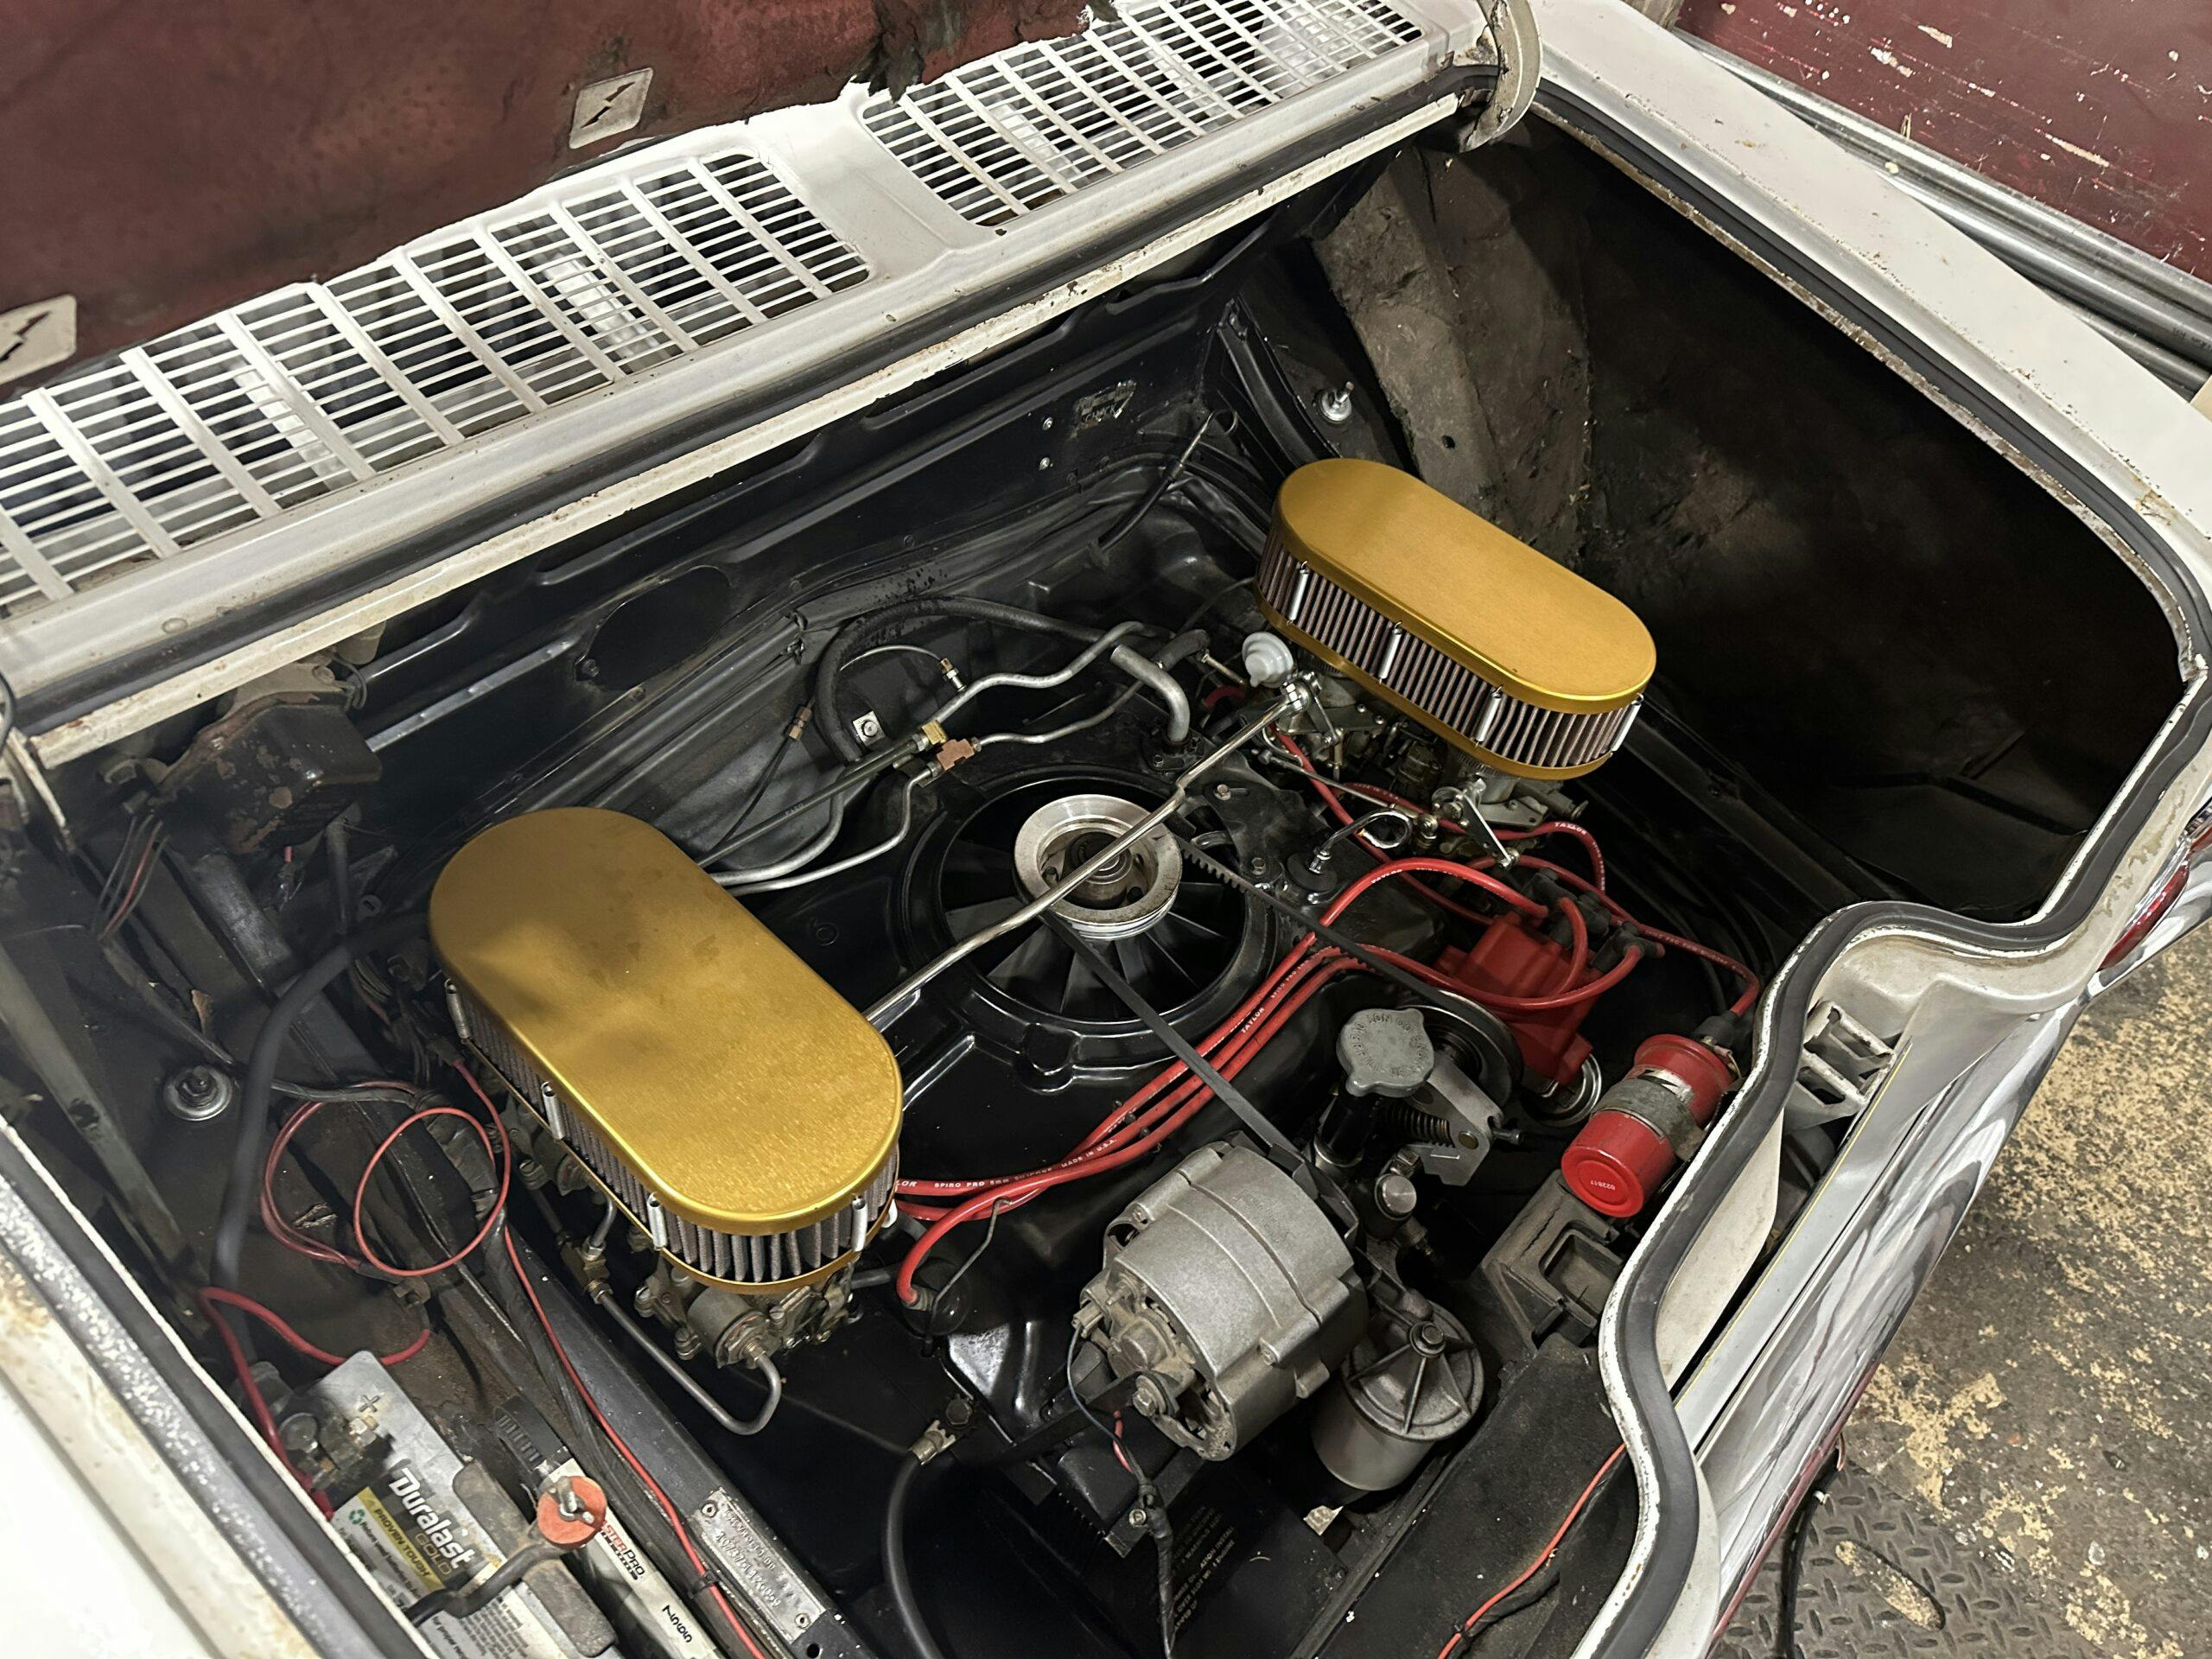 Corvair engine compartment Kyle Smith